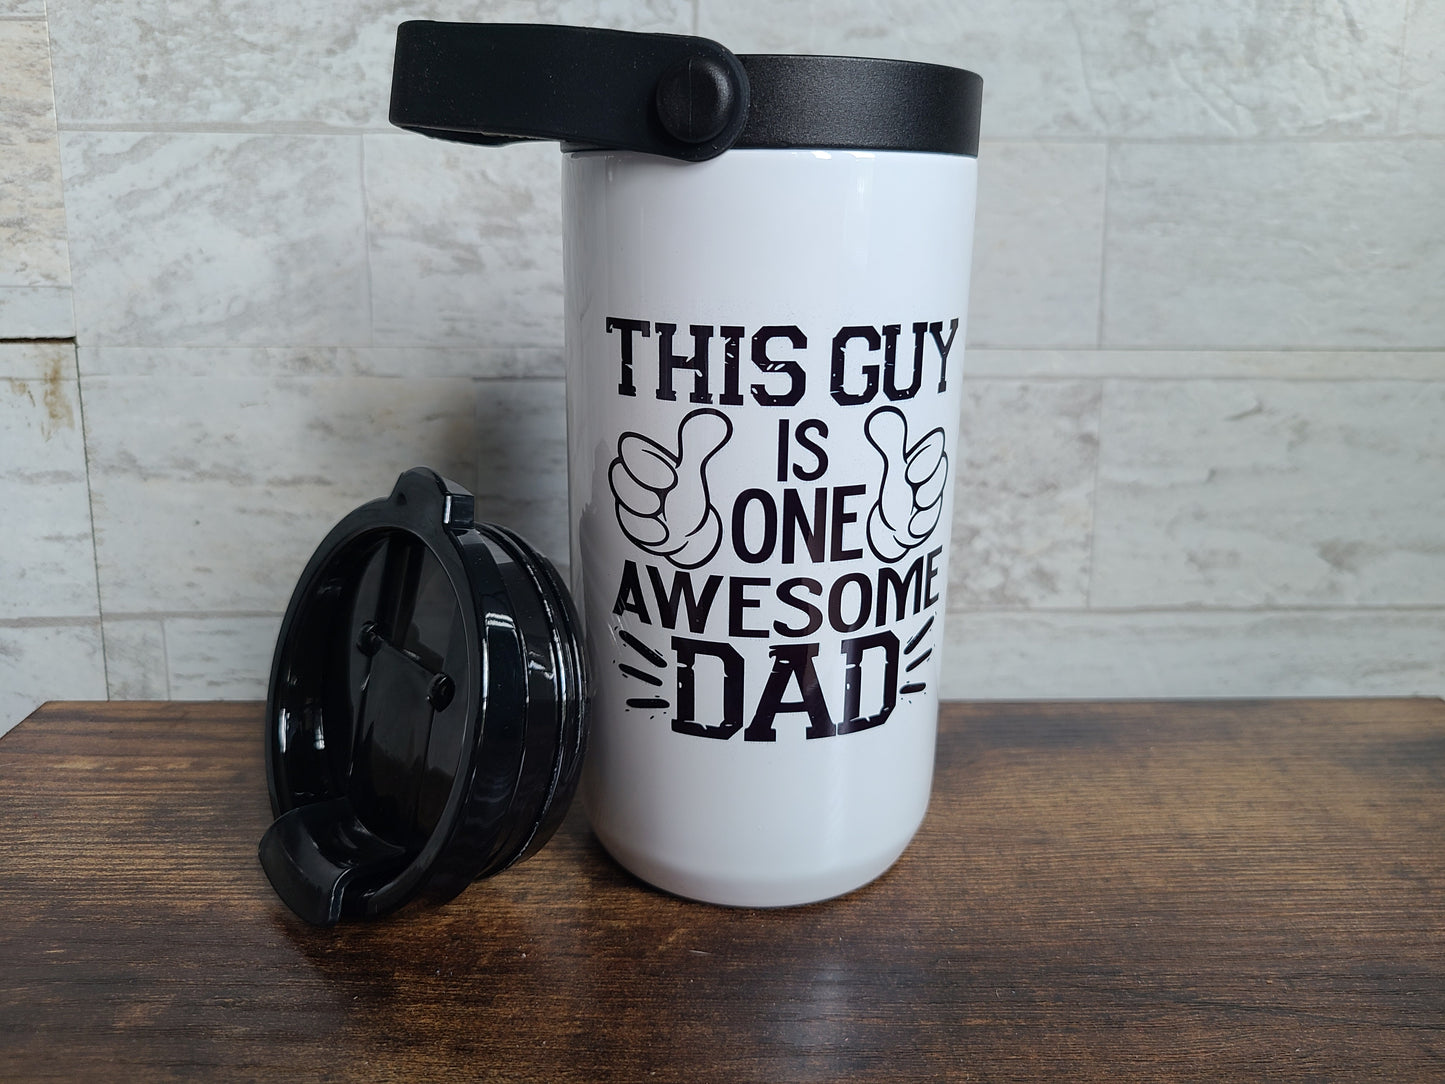 One Awesome Dad 4 in 1 Can Cooler